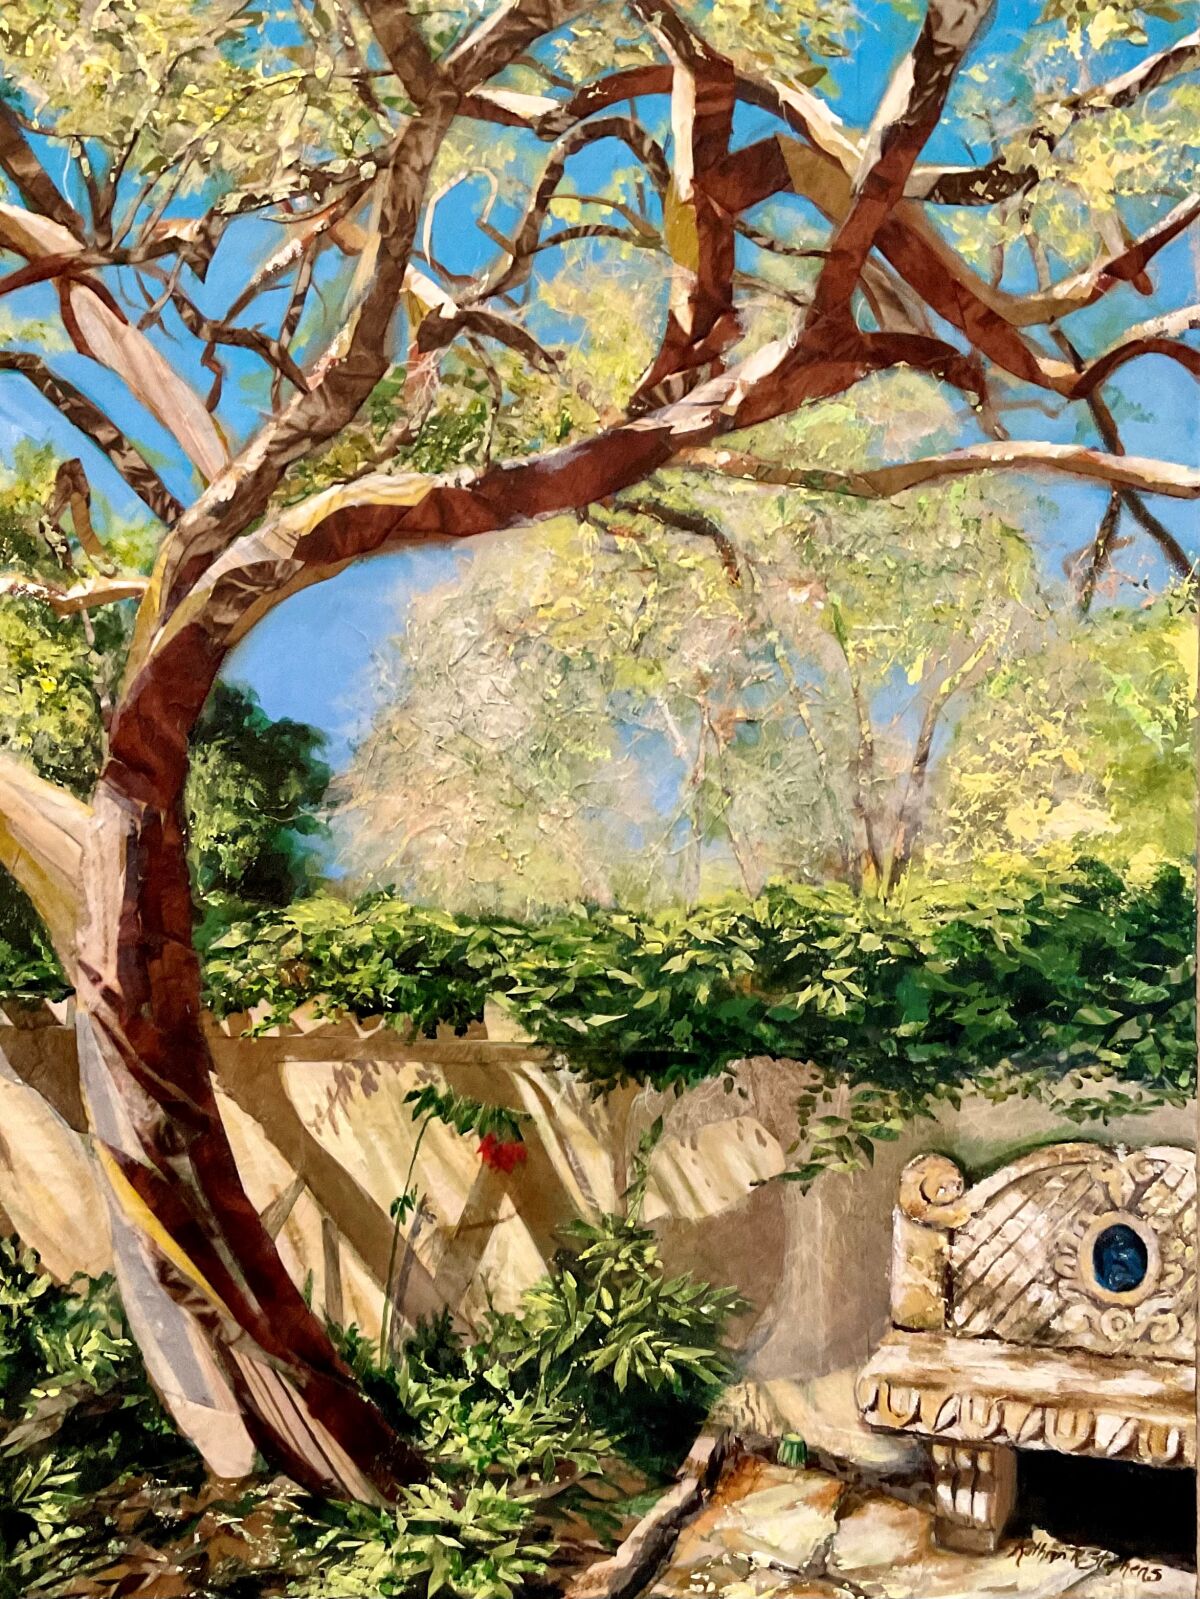 The poster art for the 2023 Secret Garden Tour of La Jolla is inspired by a garden featured on a previous tour.